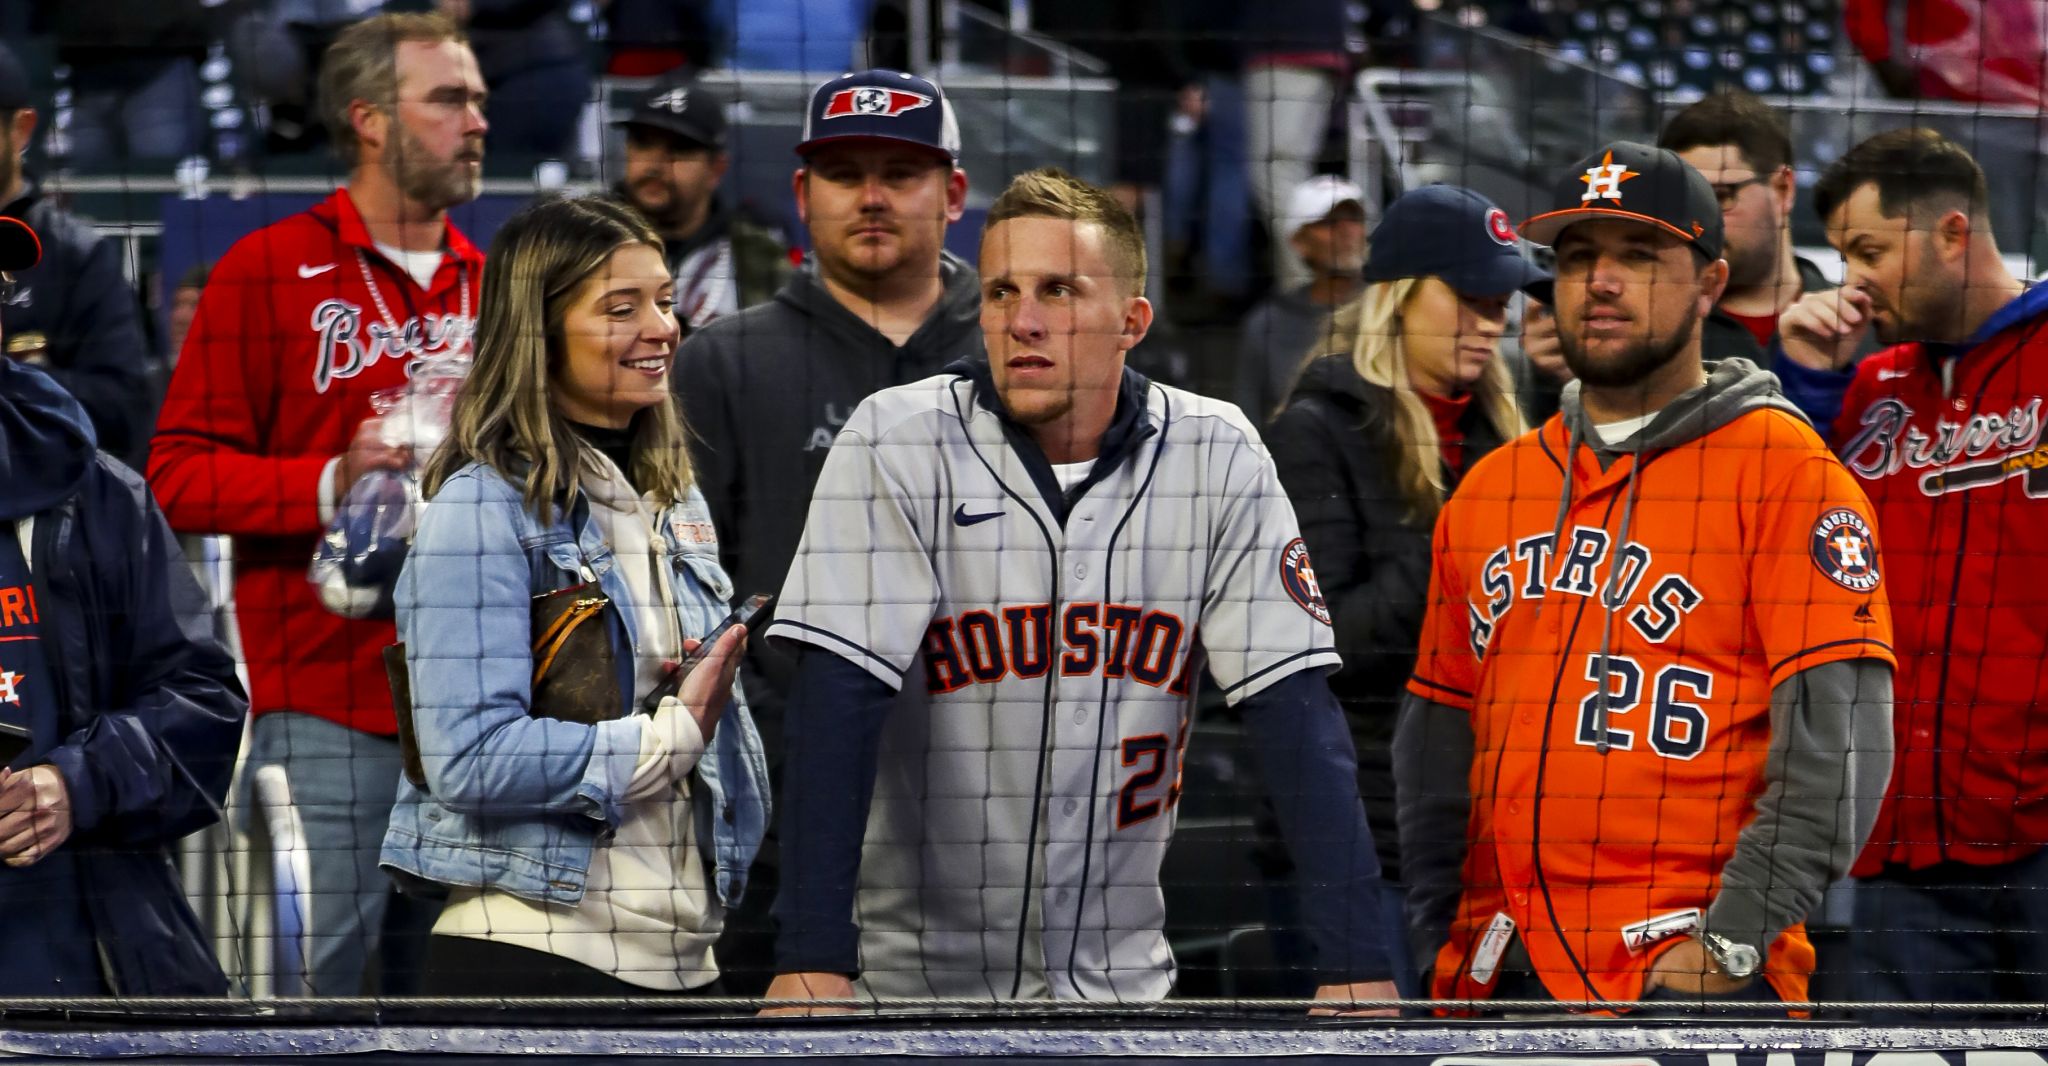 Myles Straw cheers on Astros 'family' at Game 4 of World Series